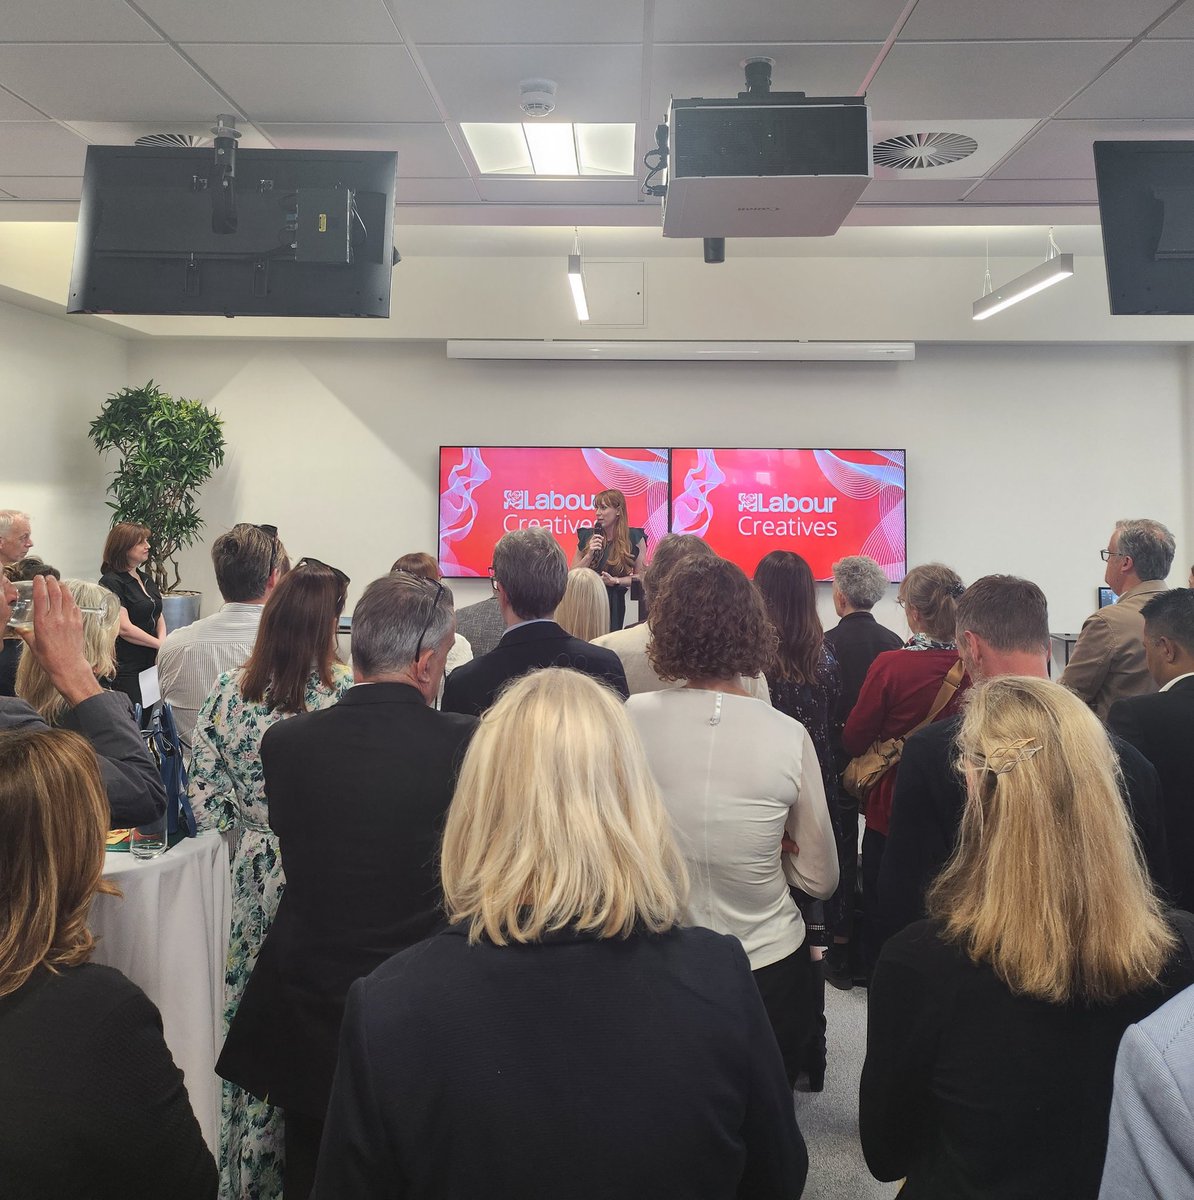 Delighted to have the privilege of representing @HelloAgent_ at tonight's launch of @UKLabour Creatives with @ITV and the powerhouse duo @LucyMPowell and @AngelaRayner! It's fantastic to be in a room brimming with Northern creative leaders! #LabourCreatives